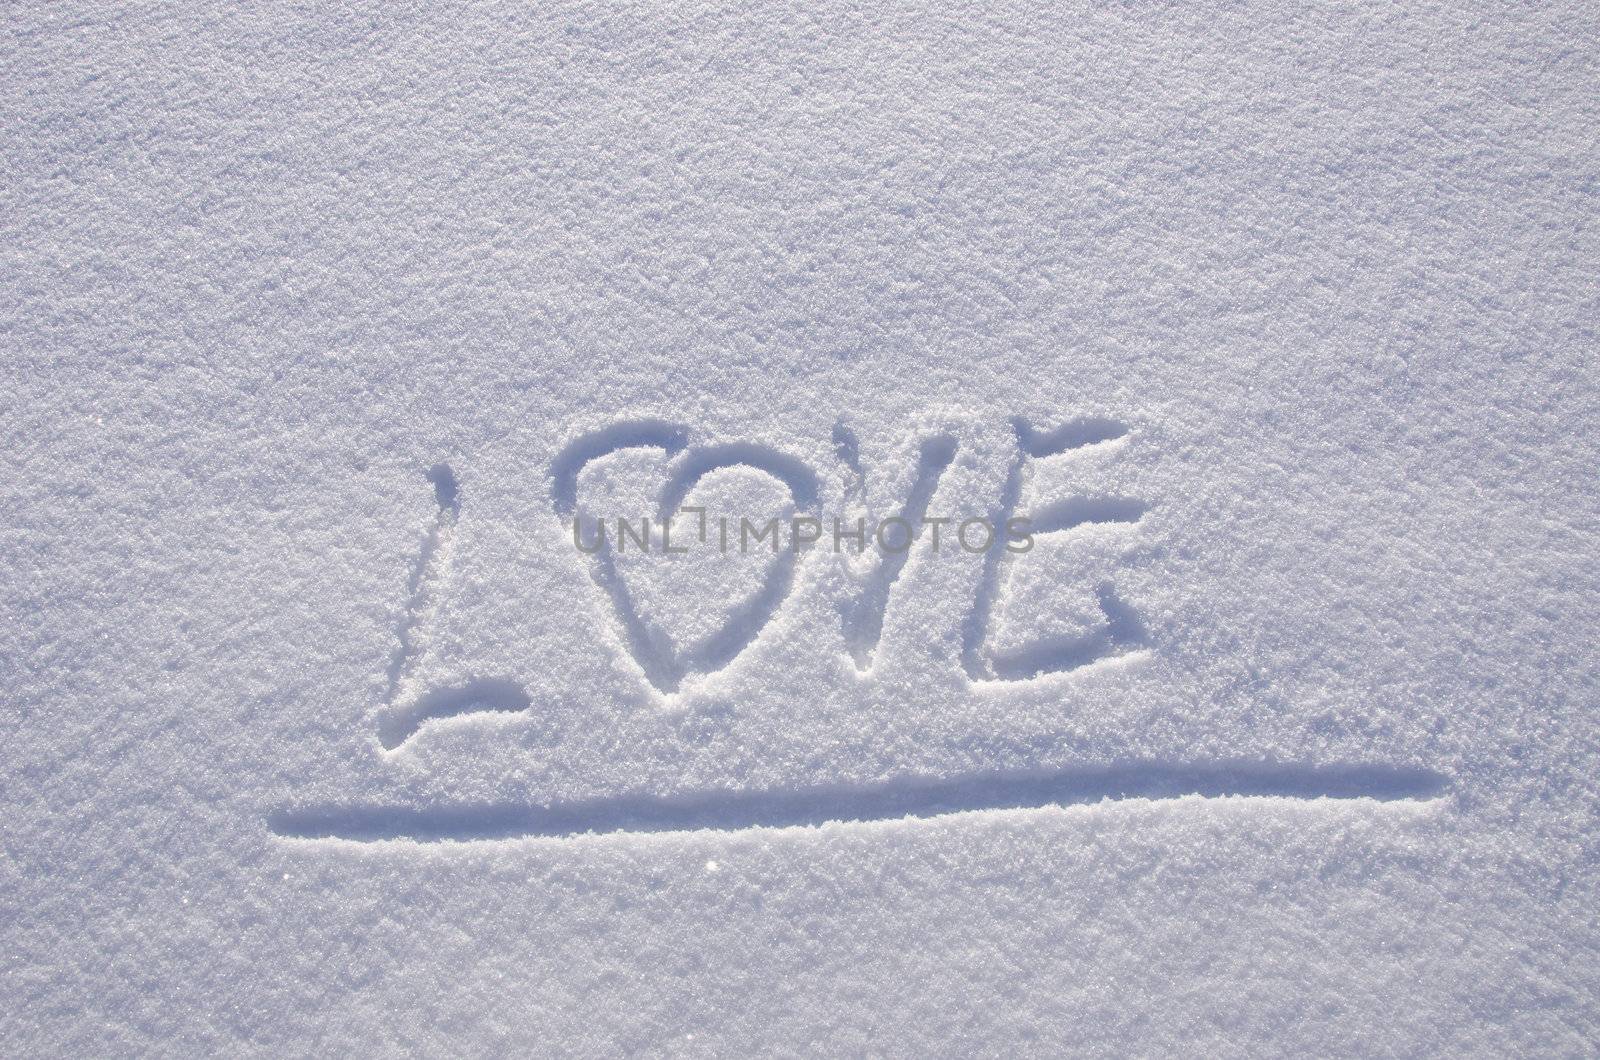 Inscription love on snow in winter. Concept expression of human feelings.